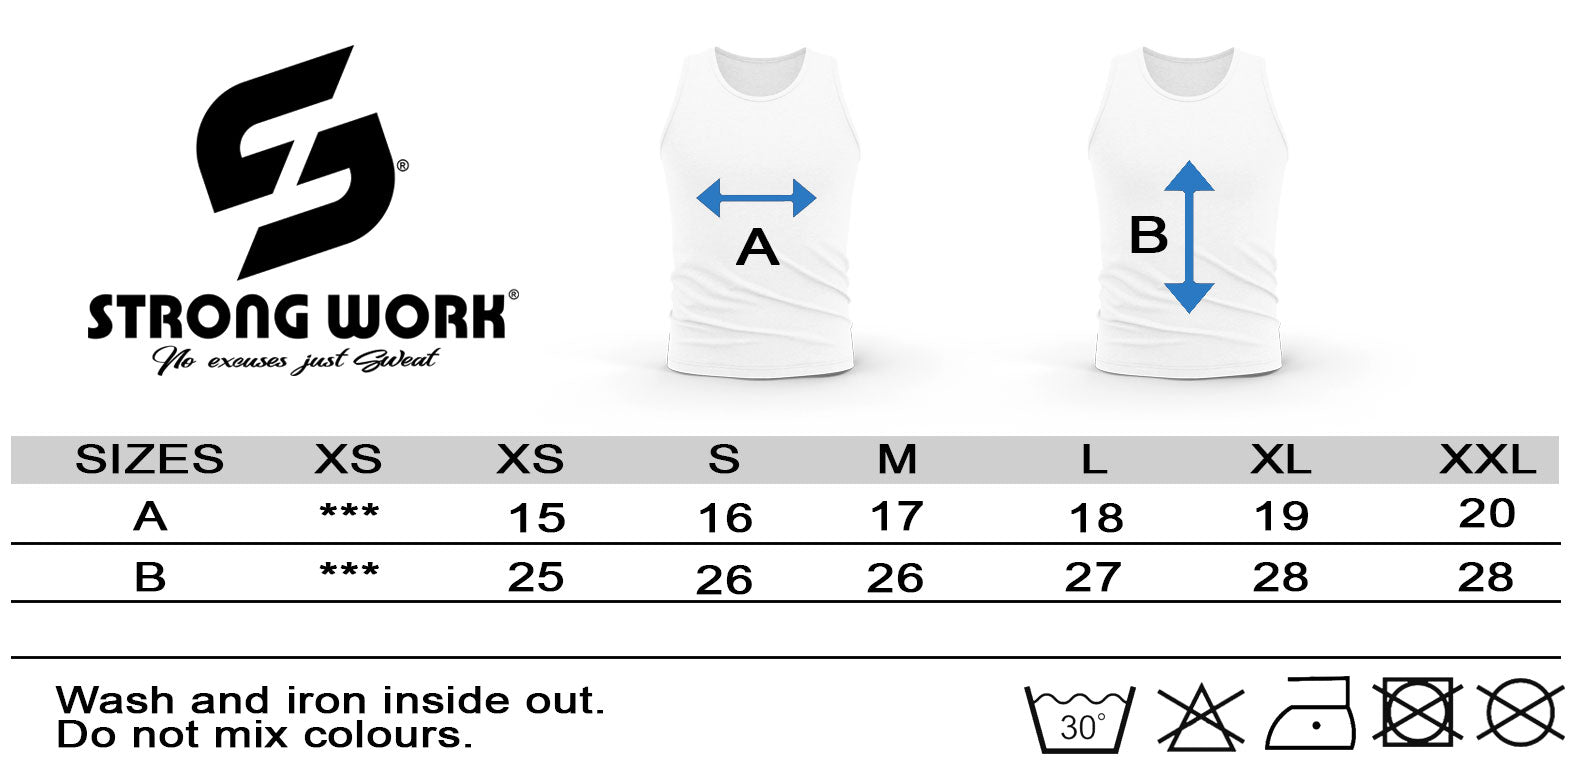 SIZE GUIDE STRONG WORK FITNESS TANK TOP FOR MEN